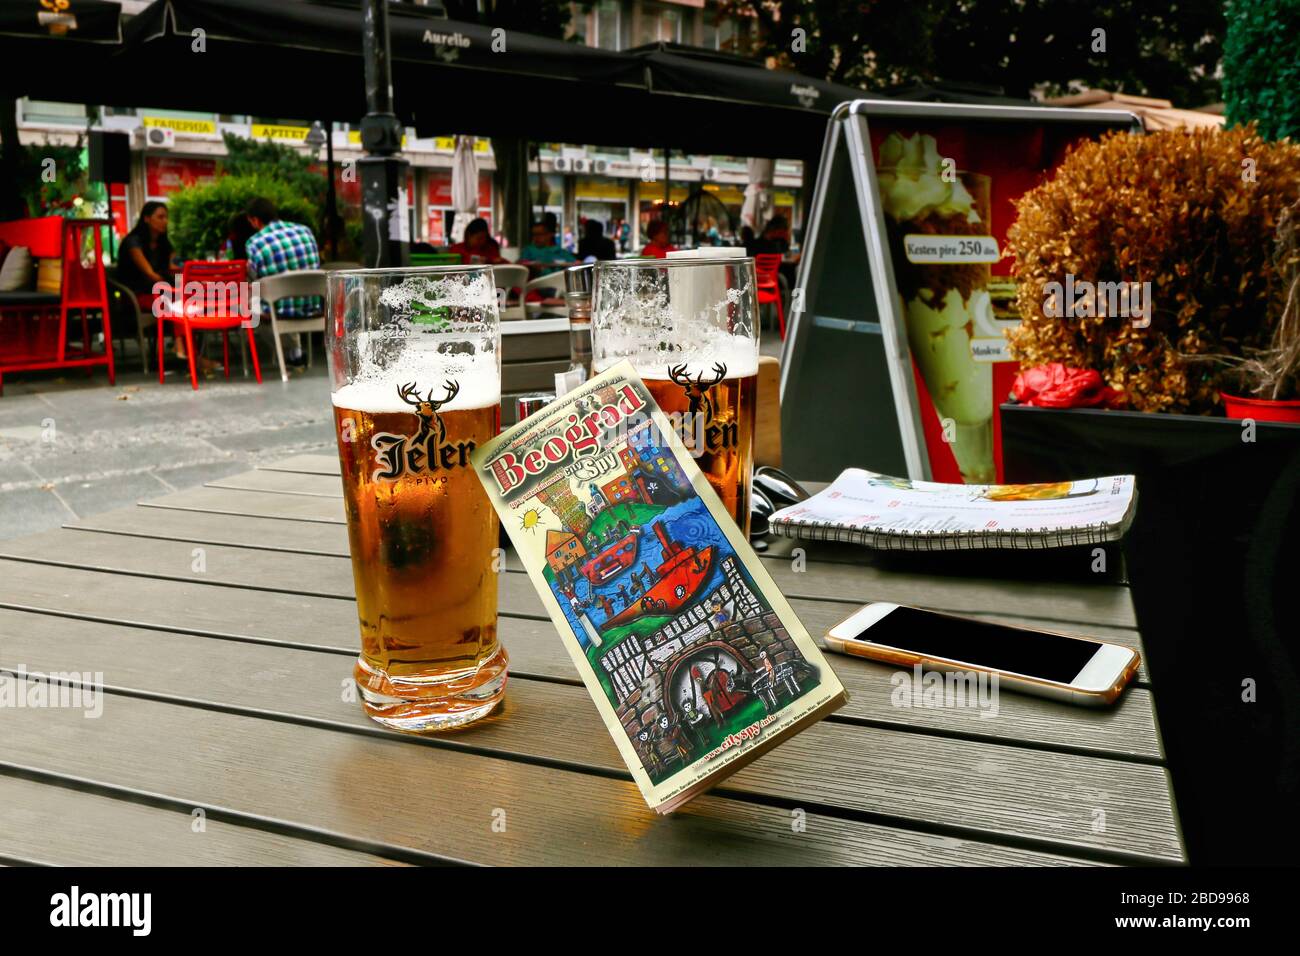 Well known local beer brand, Jelen and city guide booklet on a table at outdoor coffe/restaurant at oldtown square in Belgrade Stock Photo